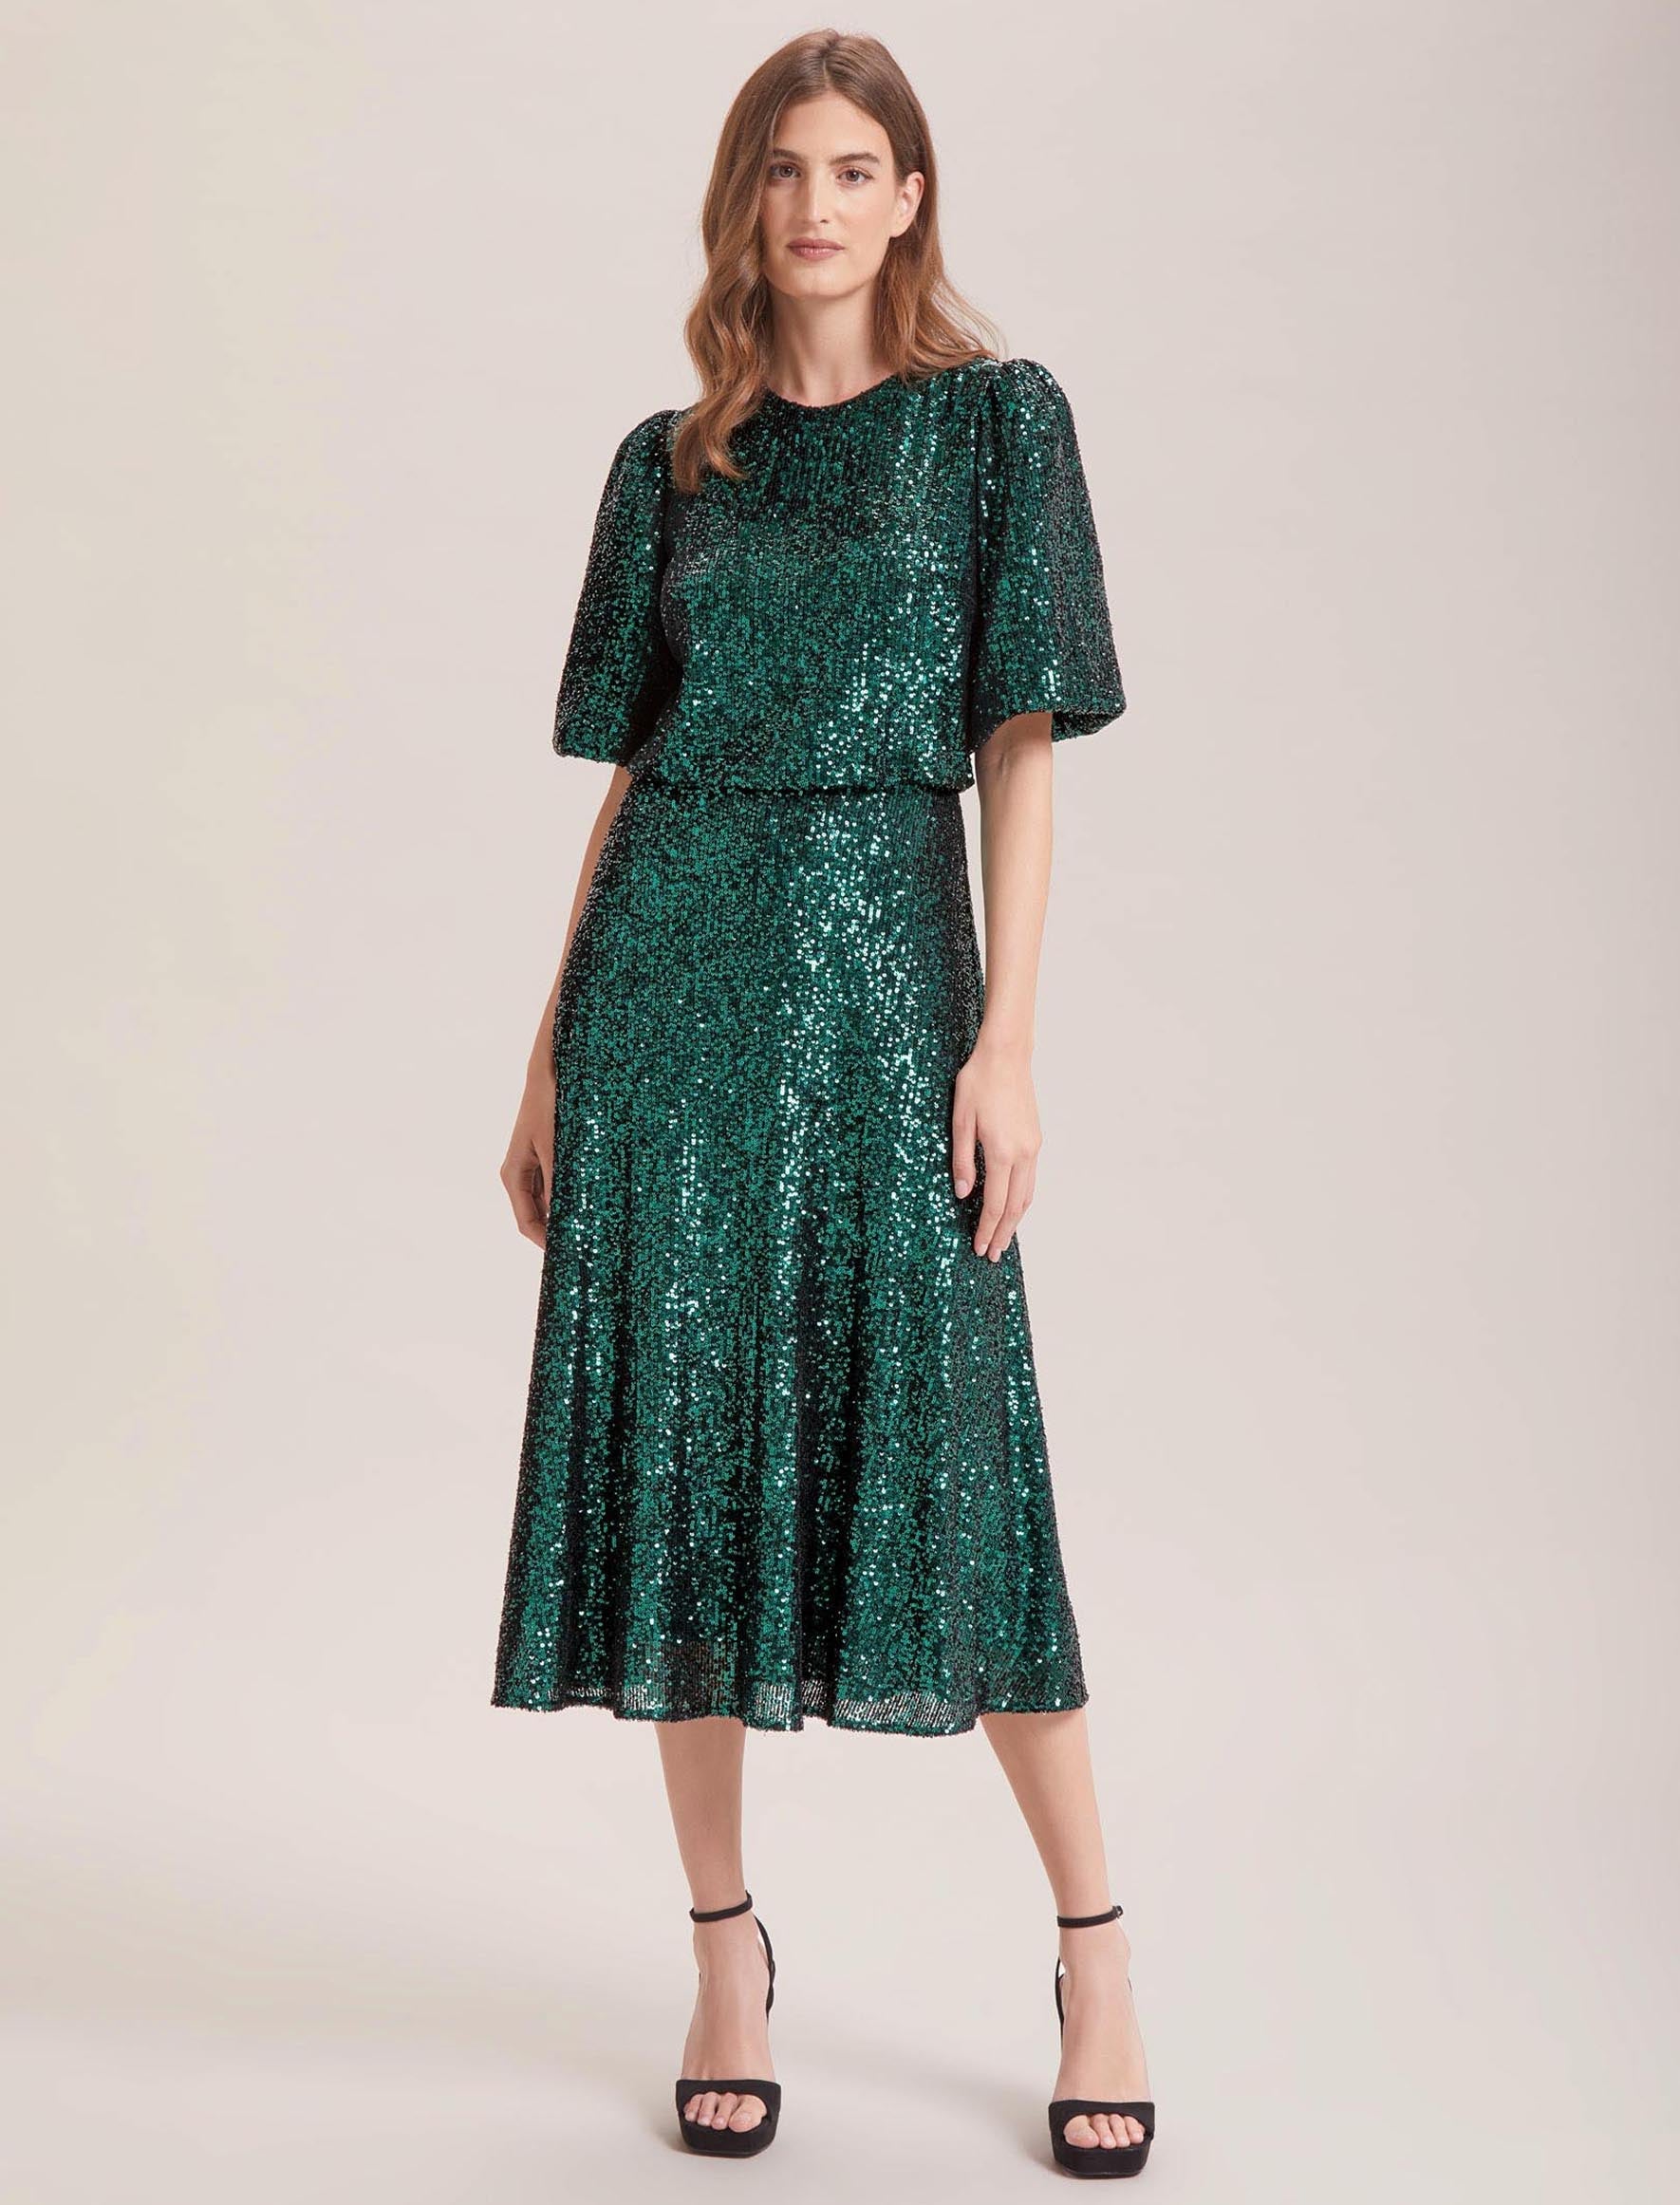 COS - Green to be seen. Discover our sculpted midi dress, finished